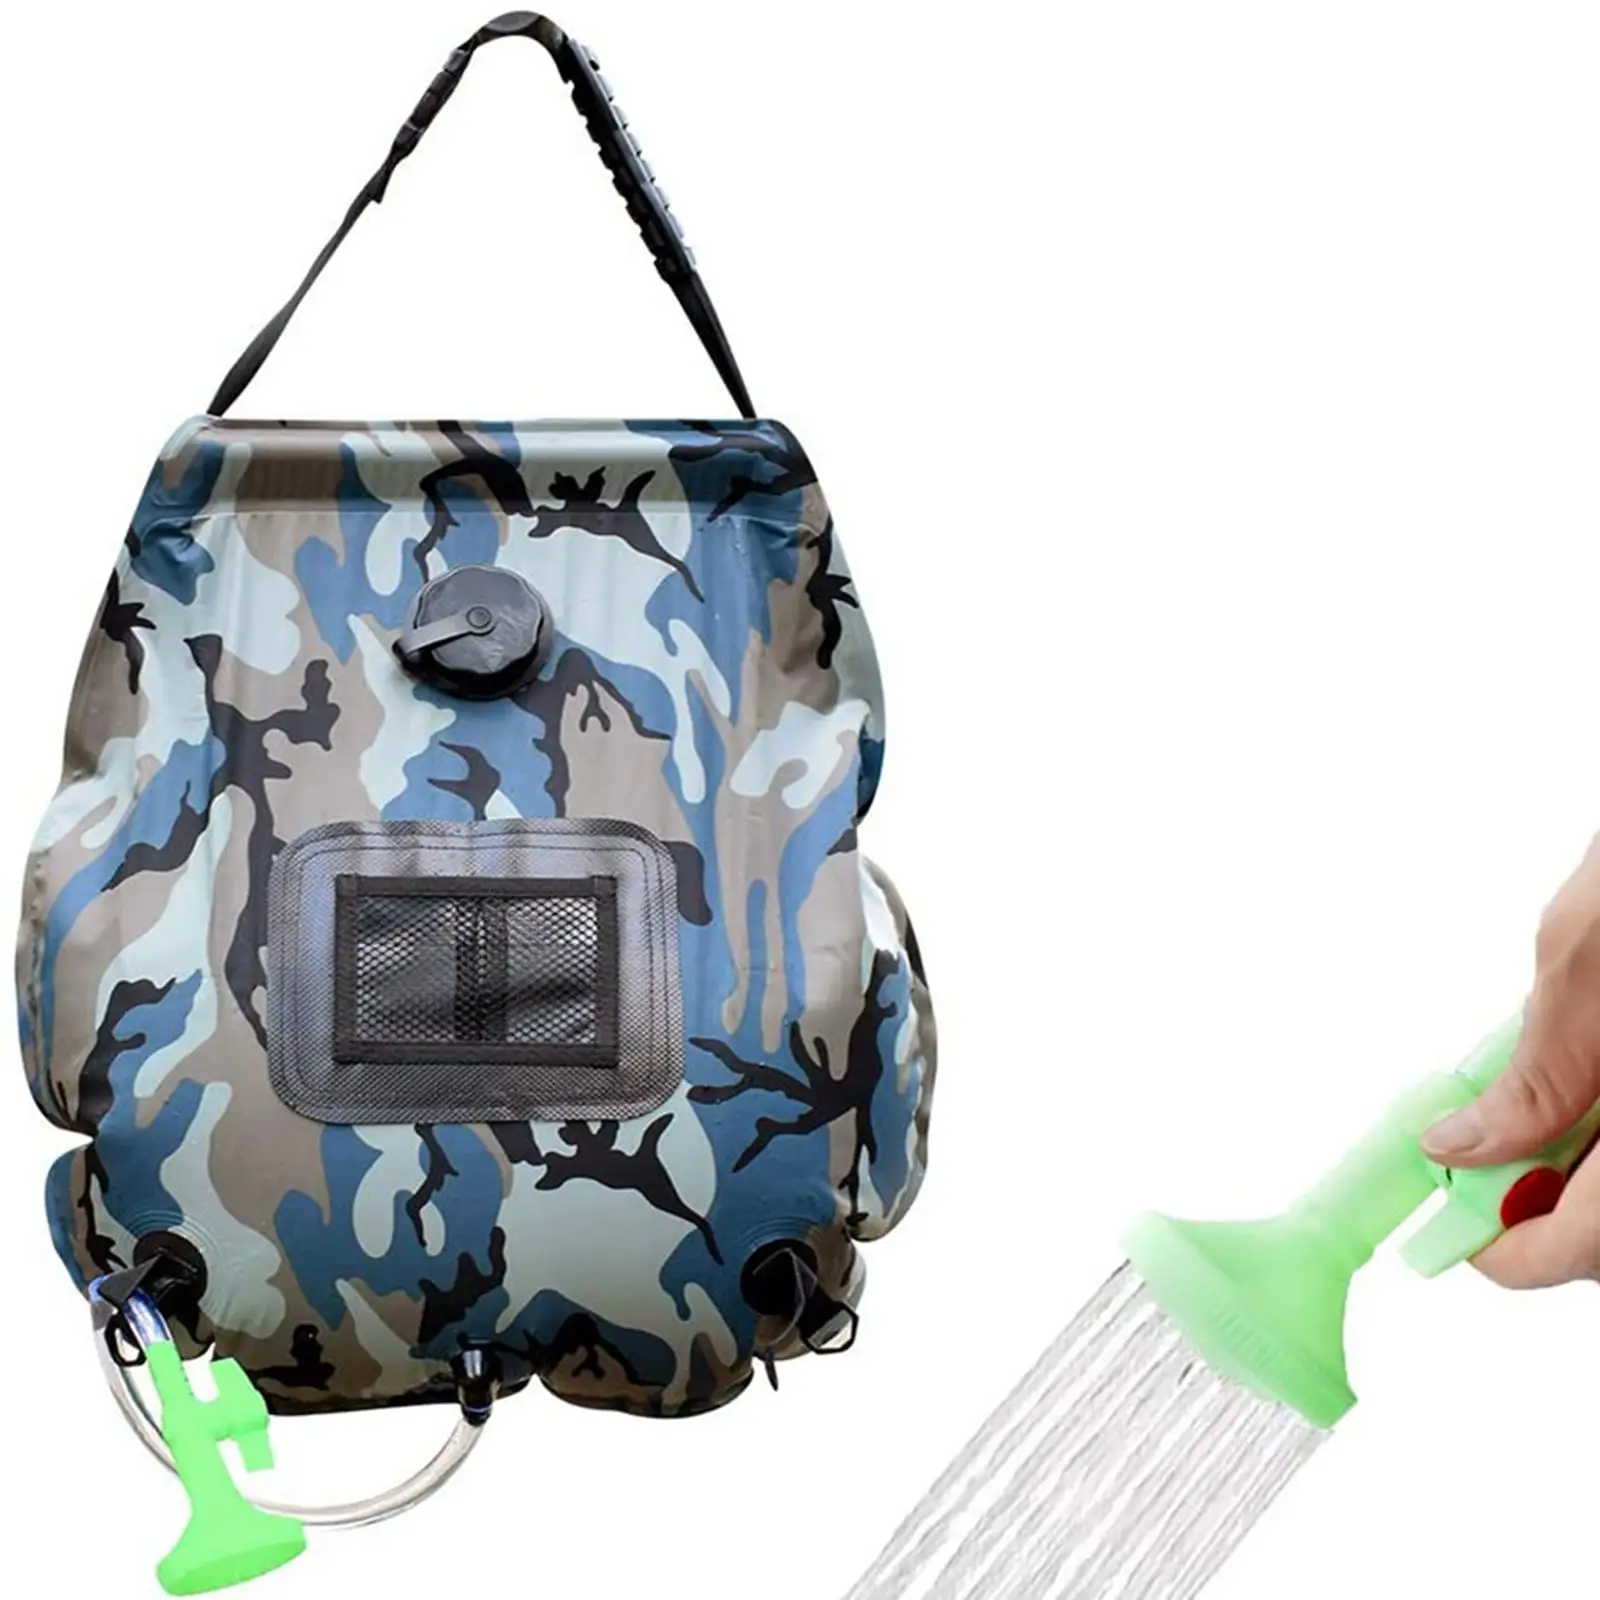 20L Outdoor Camping Shower Bag Folding Water Storage with Removable Hose Heated